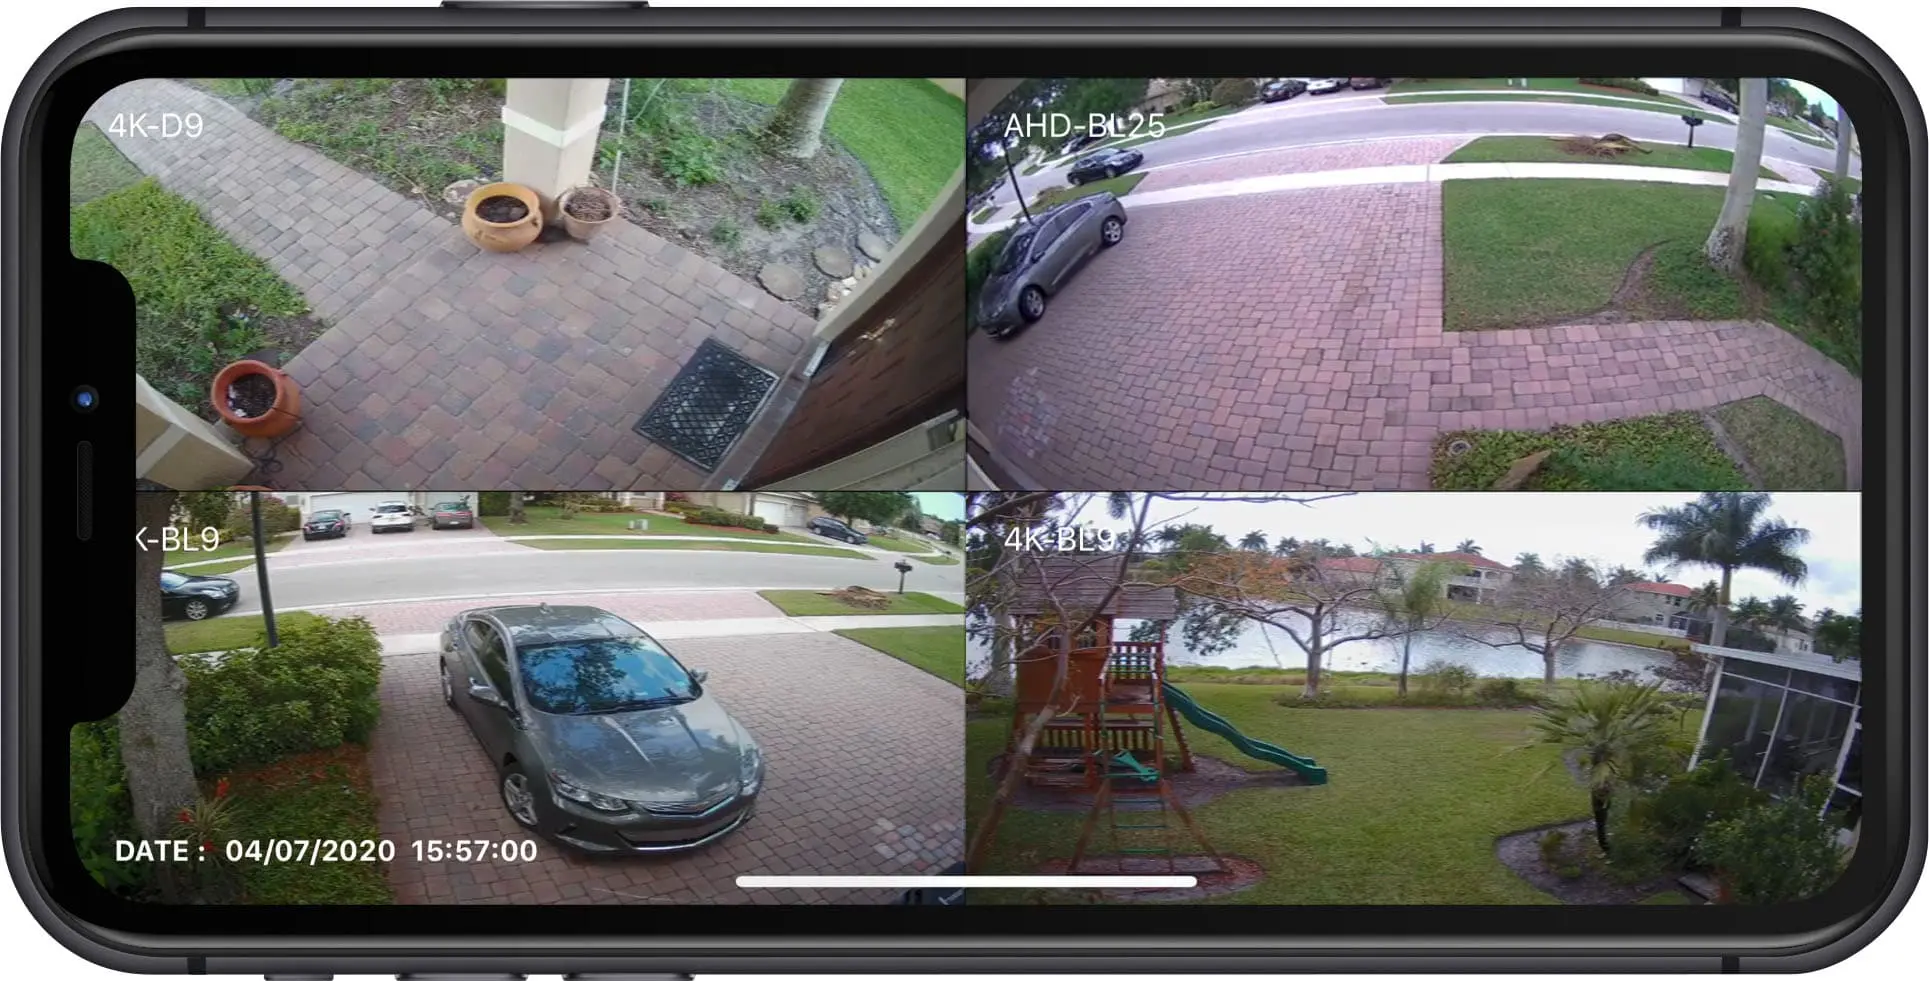 Stay Connected to Your Home Security: An image showcasing security cameras capturing the driveway, yard, and front door, with the live feed displayed on a smart phone. Monitor your property remotely and maintain peace of mind with this convenient mobile surveillance solution.